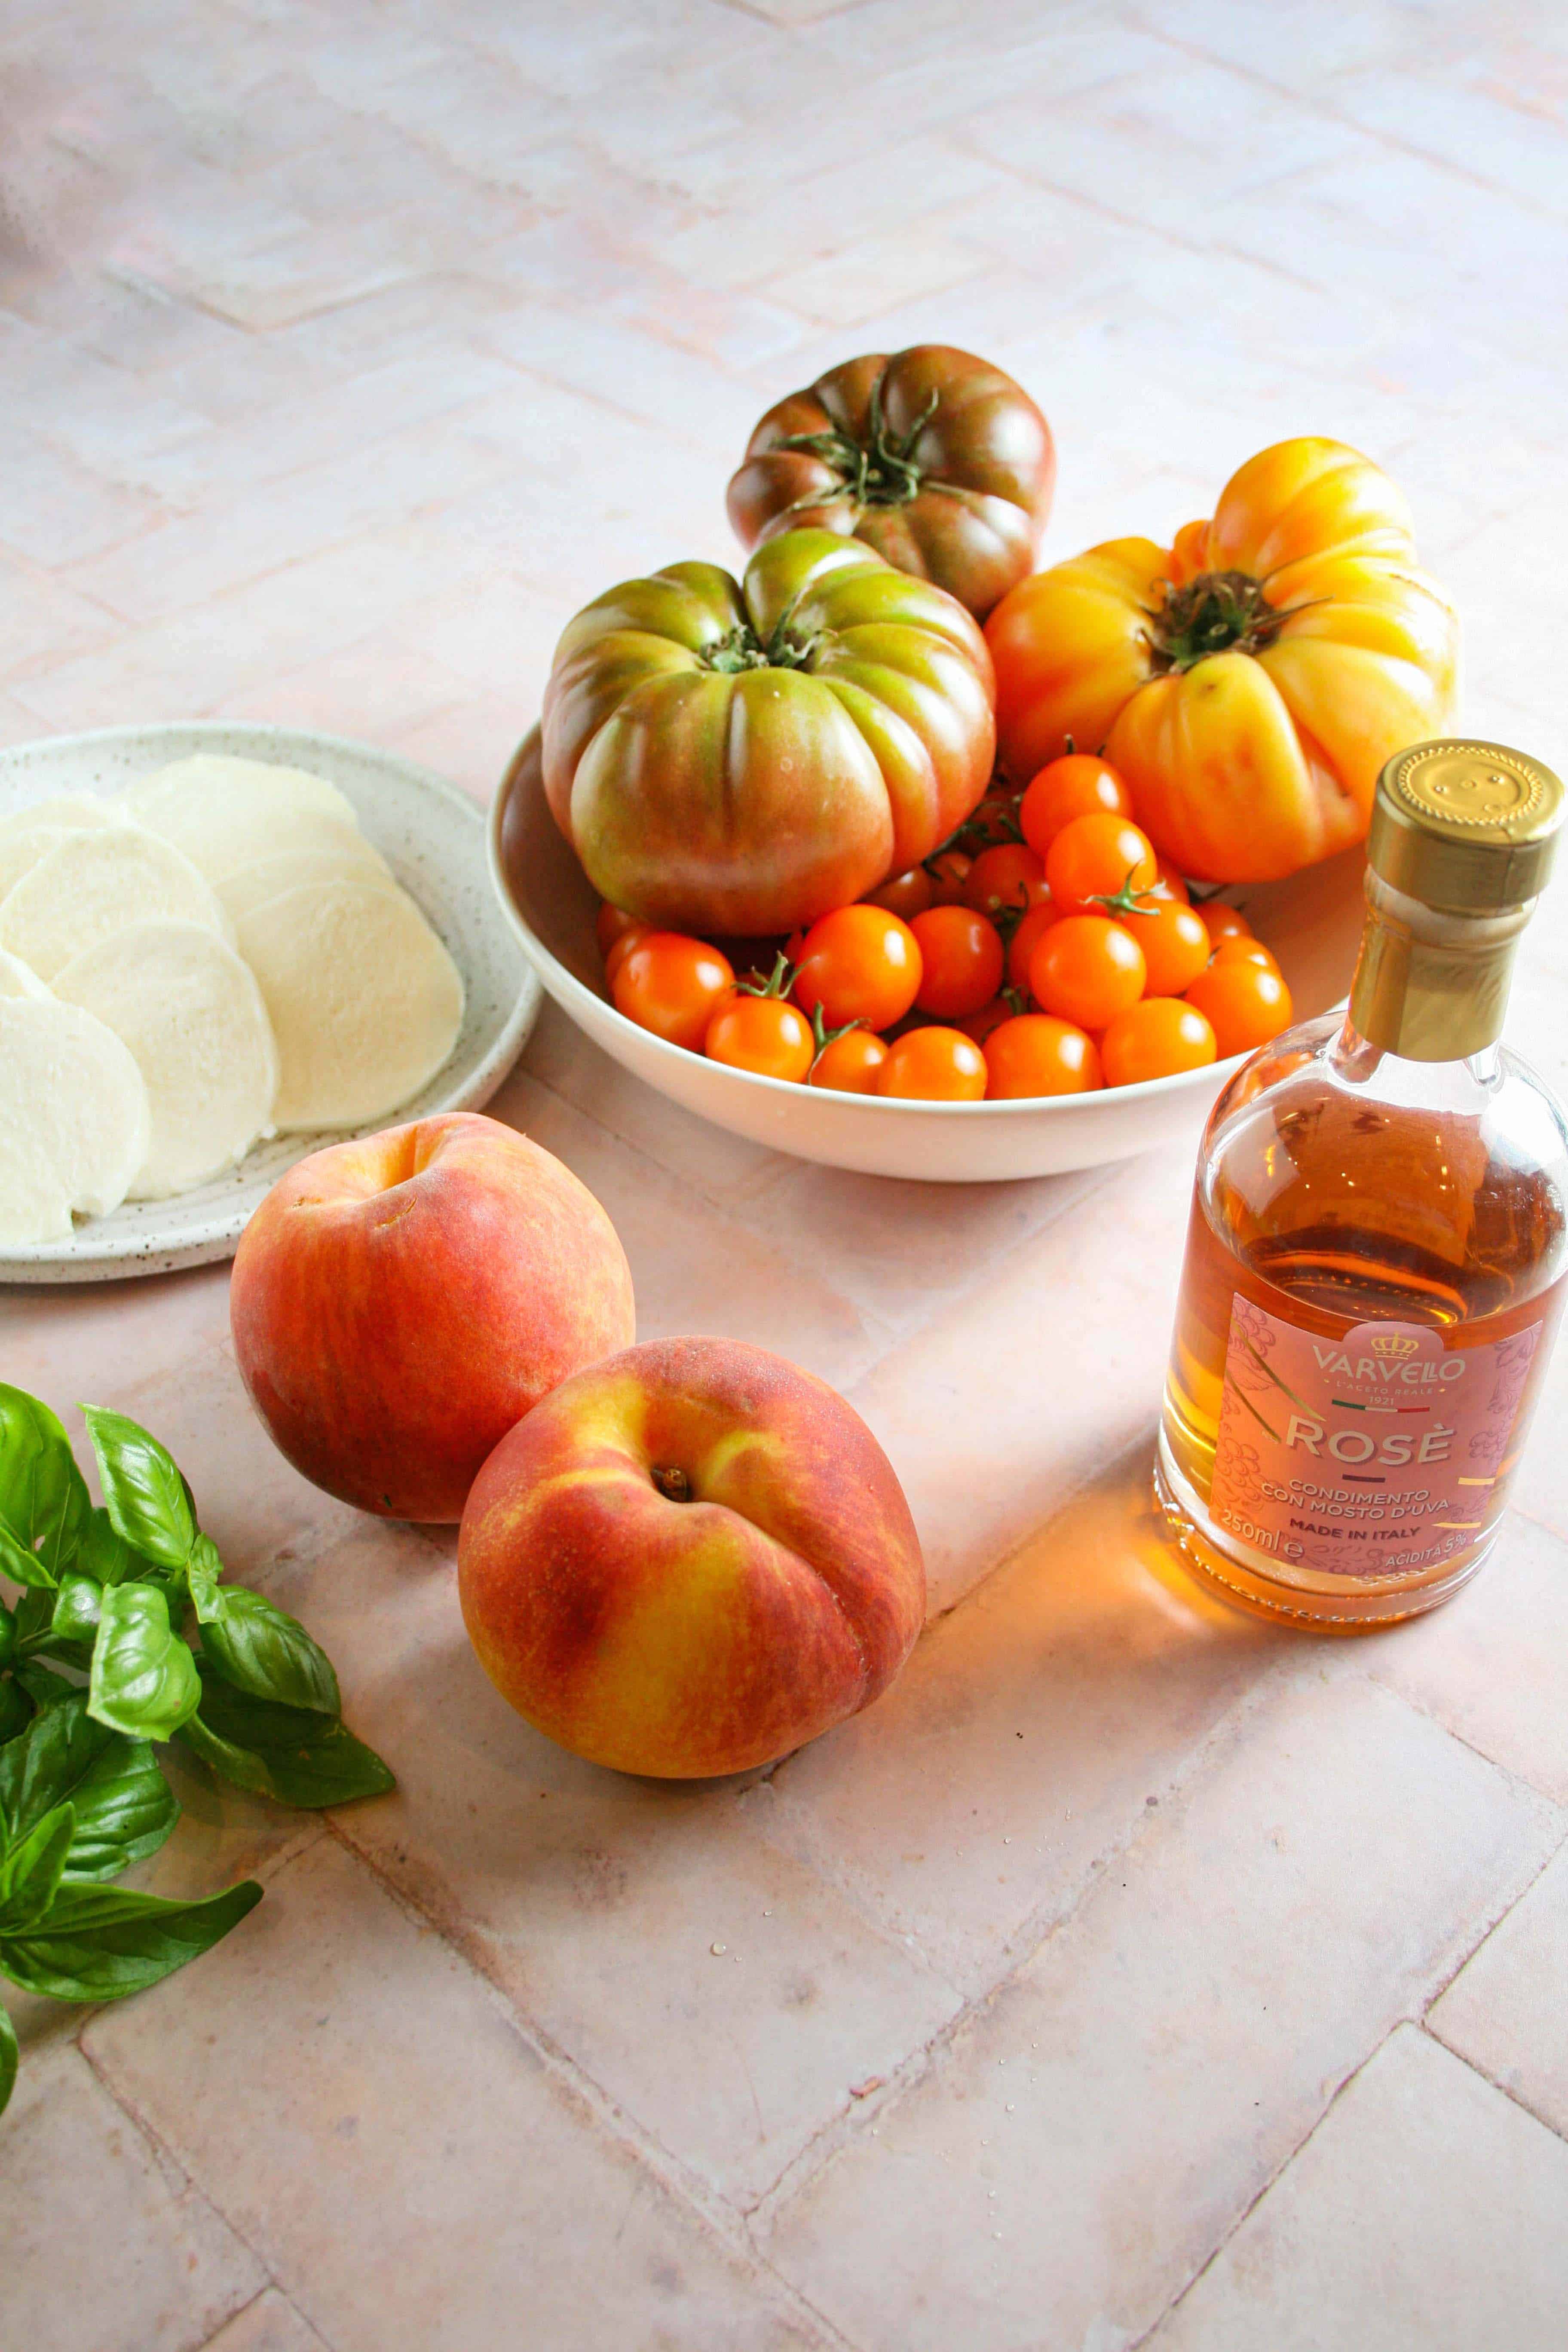 ingredient photograph showing tomatoes, peaches, vinegar, basil, and cheese